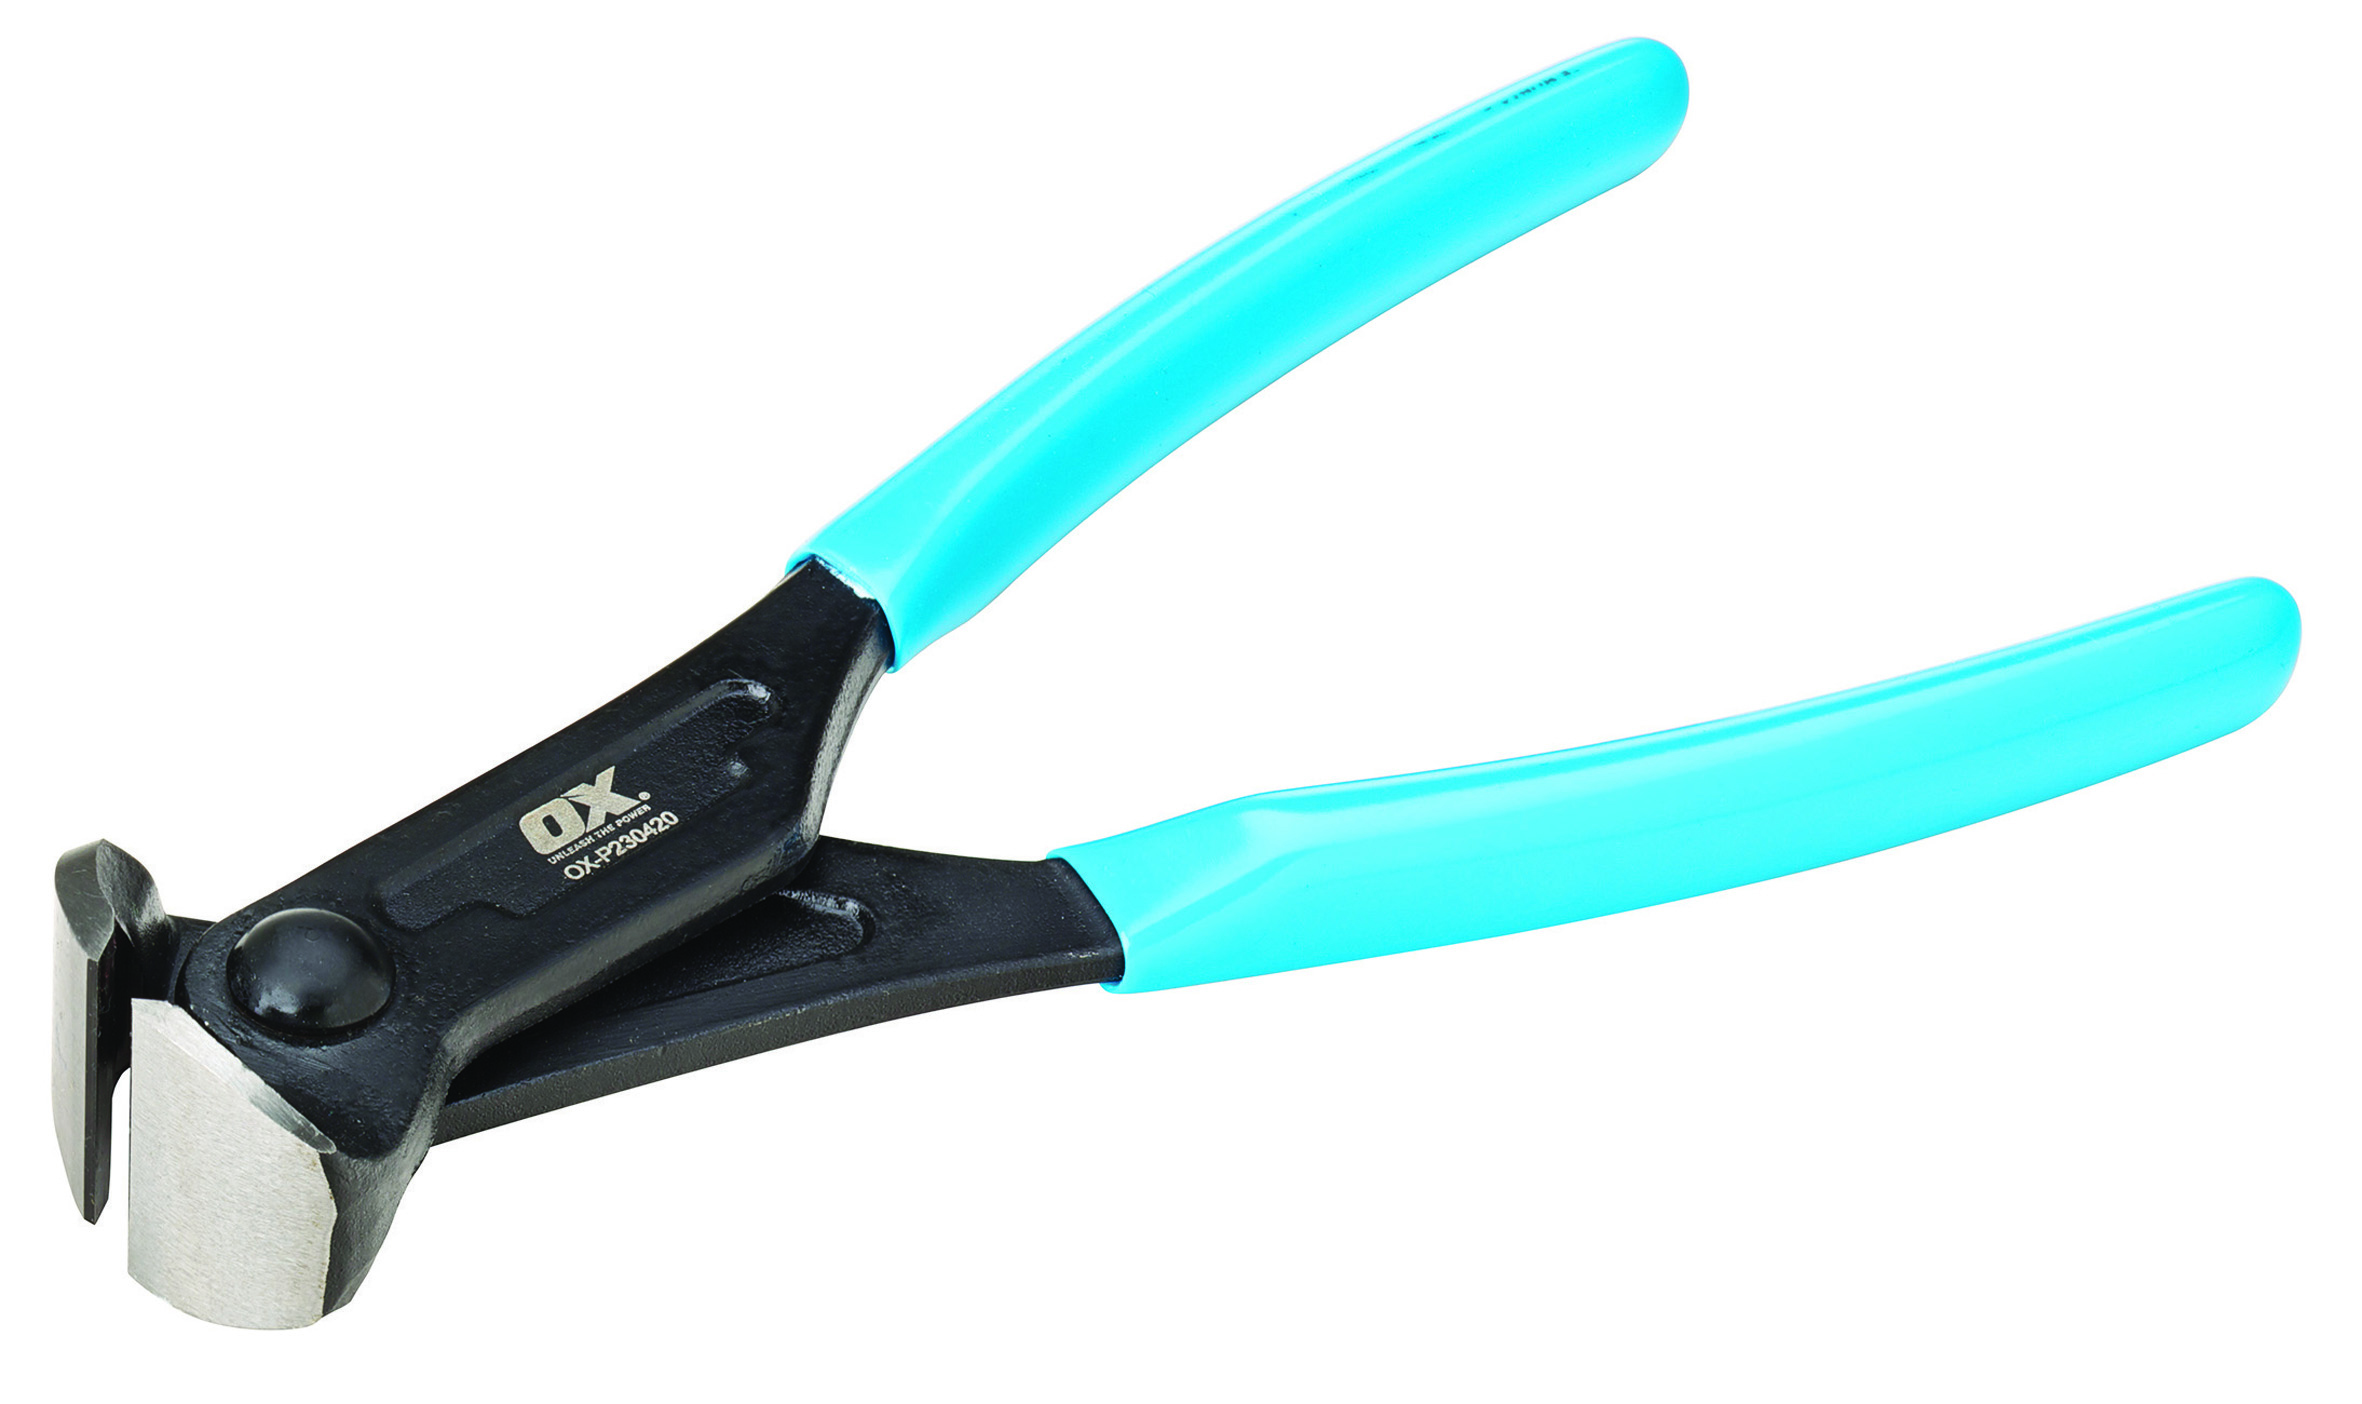 OX Pro Wide Head End Cutting Nippers - 200mm